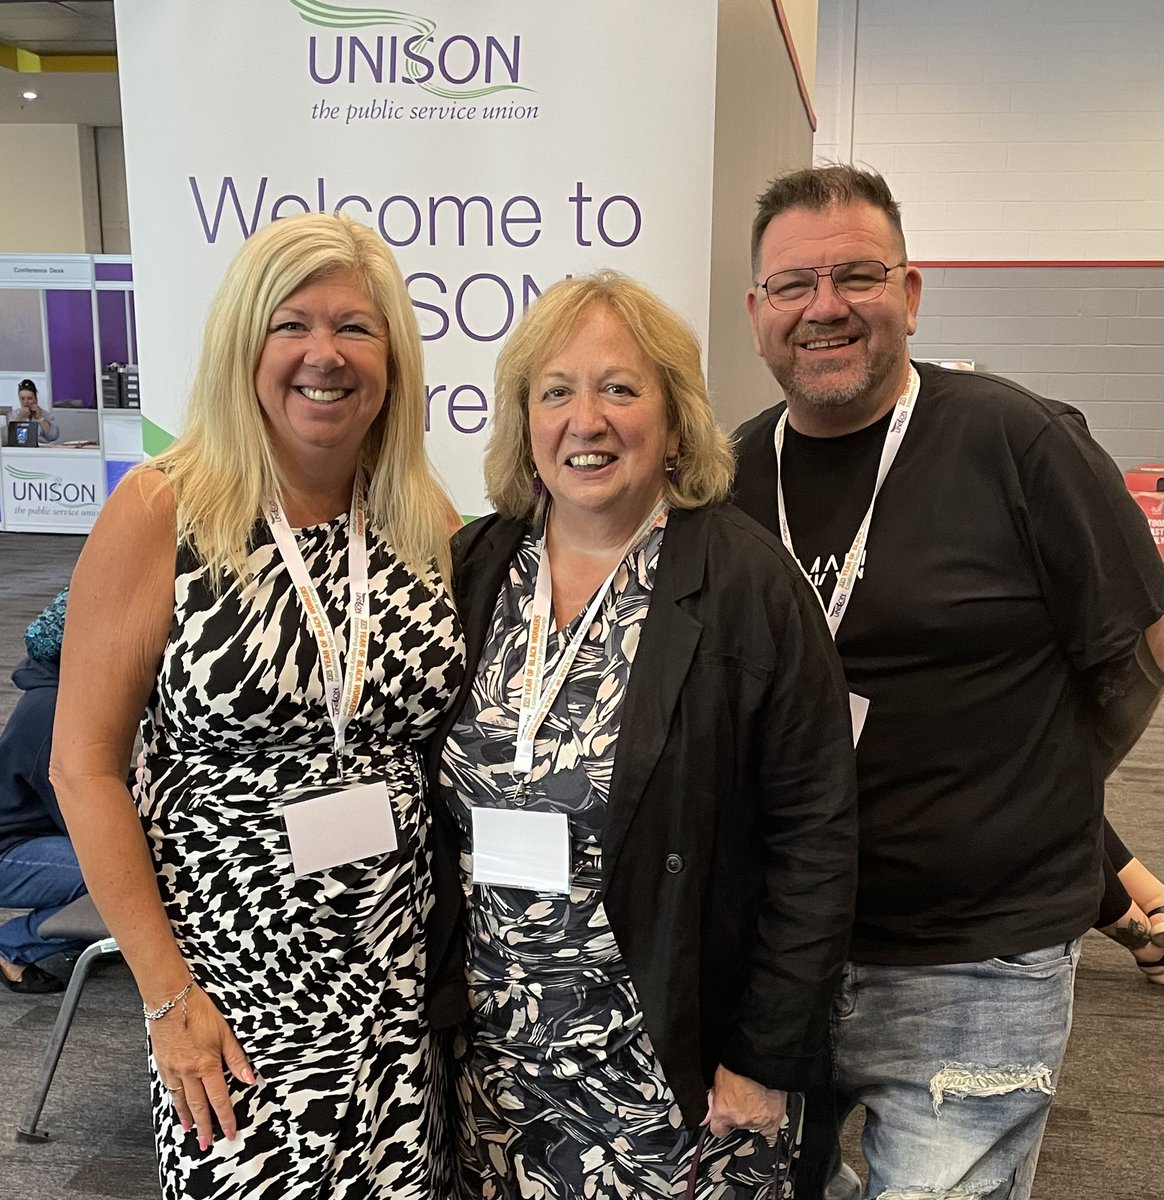 #NDC2023 Finally we have a photograph with our Christina UNISON General Secretary. On behalf of our National Private Contractors Forum @UnisonWakey @unisonyh @unisonprivate